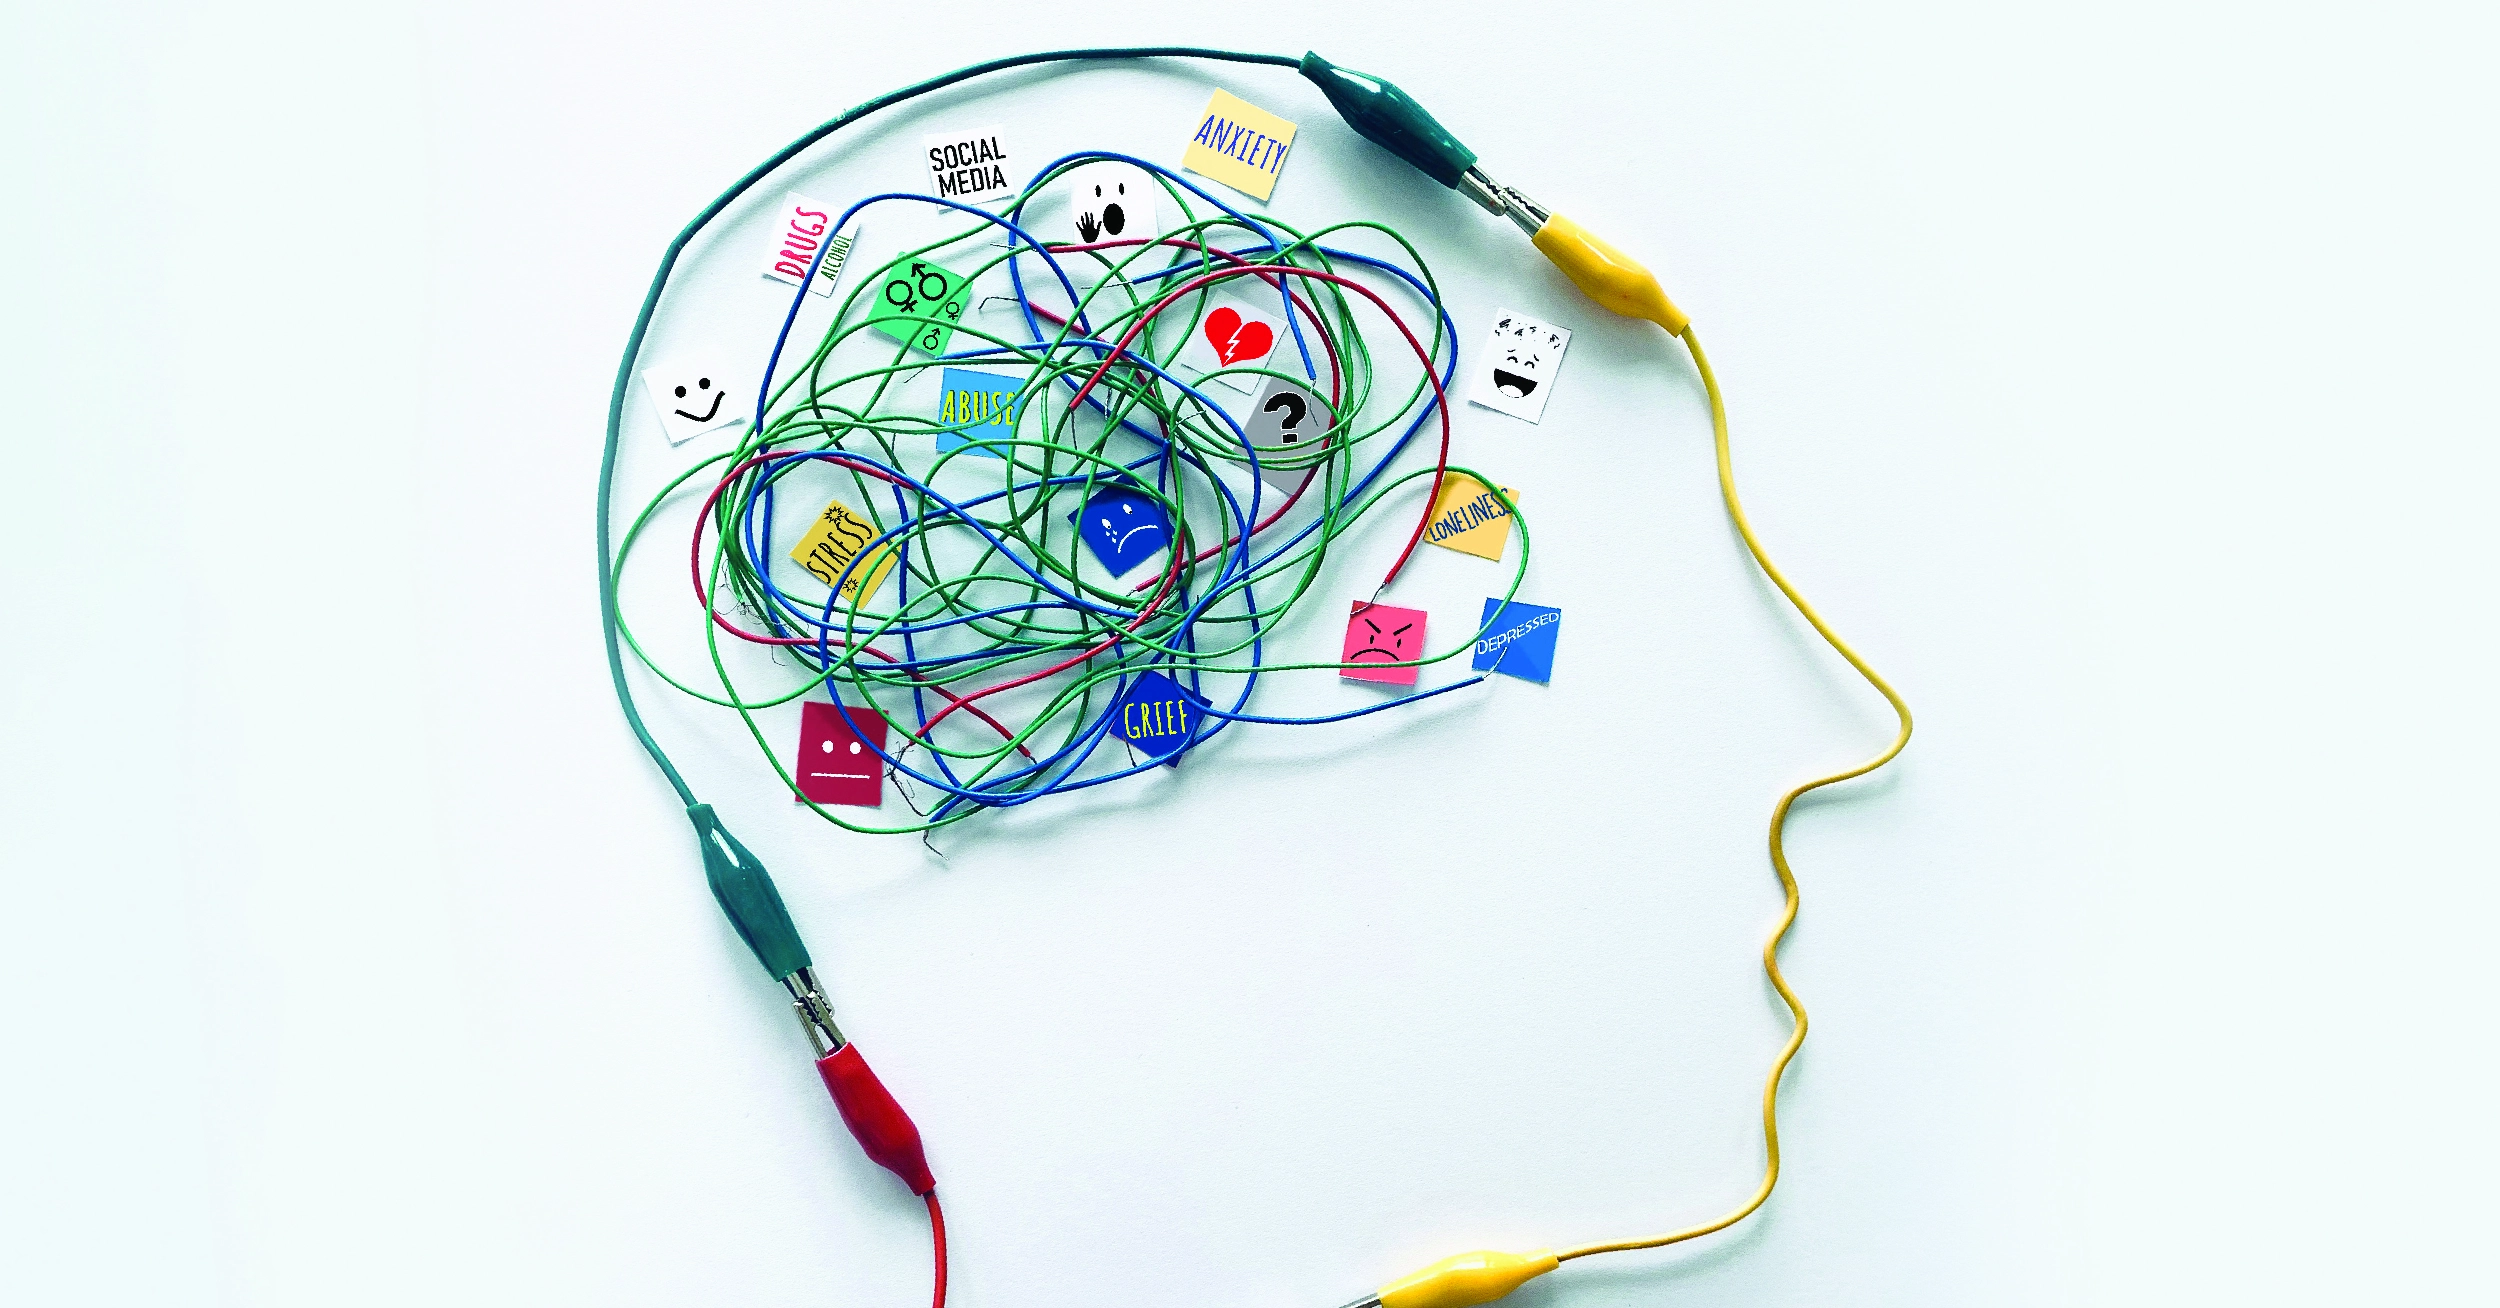 Wires arranged to represent a head and brain. Addictions are influenced by genetic and behavioral factors and personality.